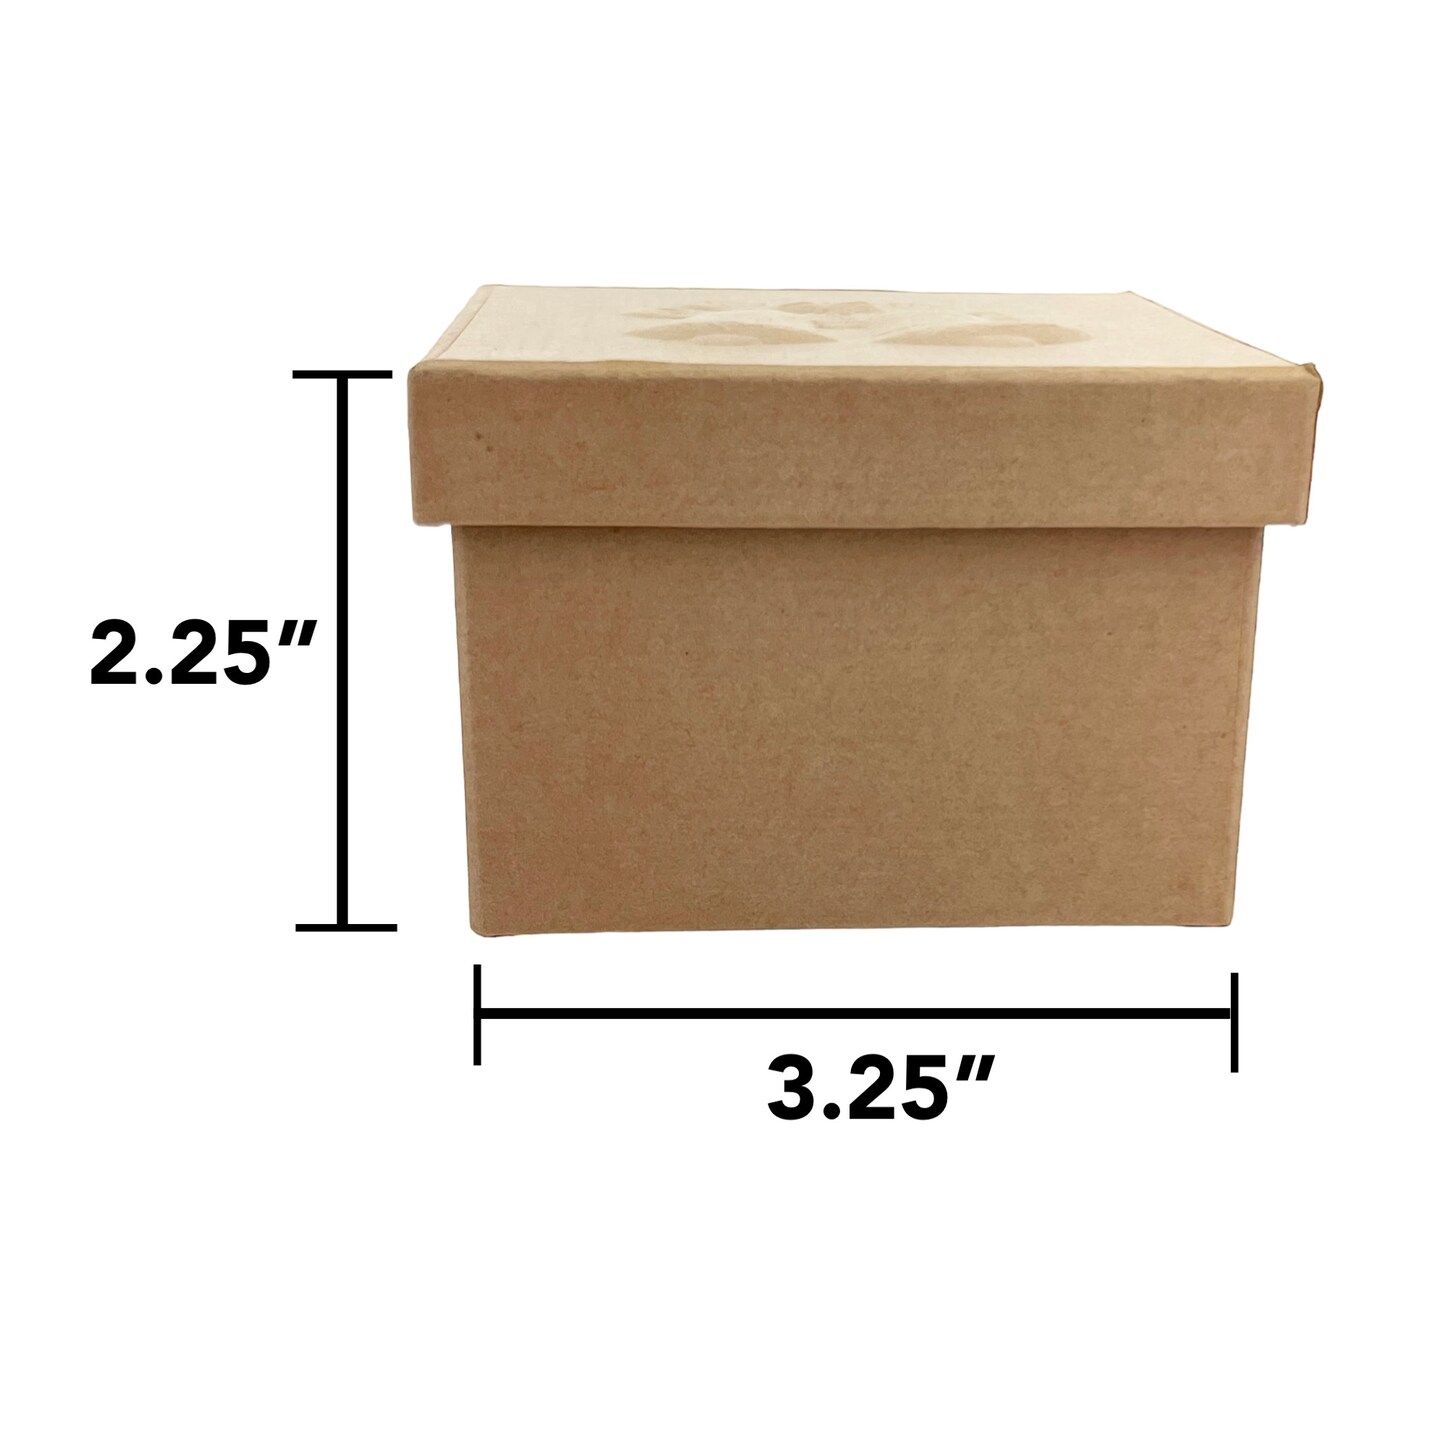 Value Pack of 12 Square Box with Bells Embossed Lid